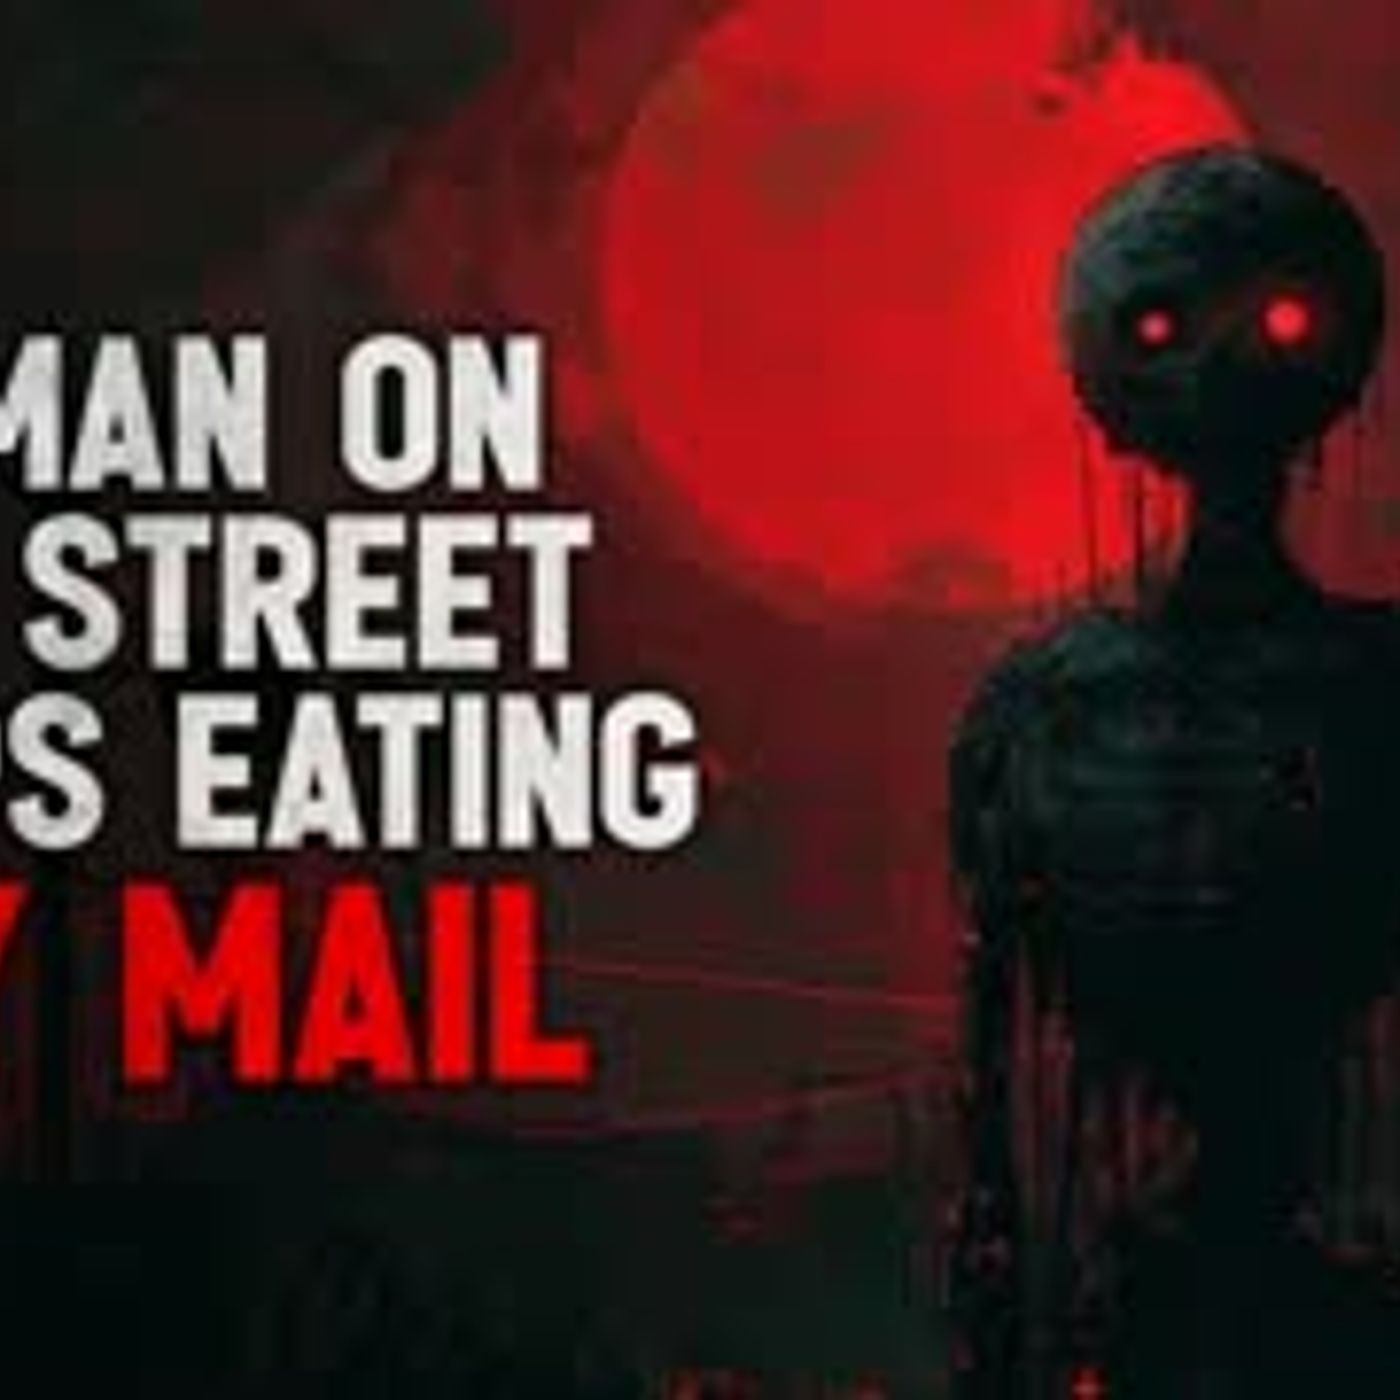 "Every morning, a man on my street keeps eating my mail" Creepypasta